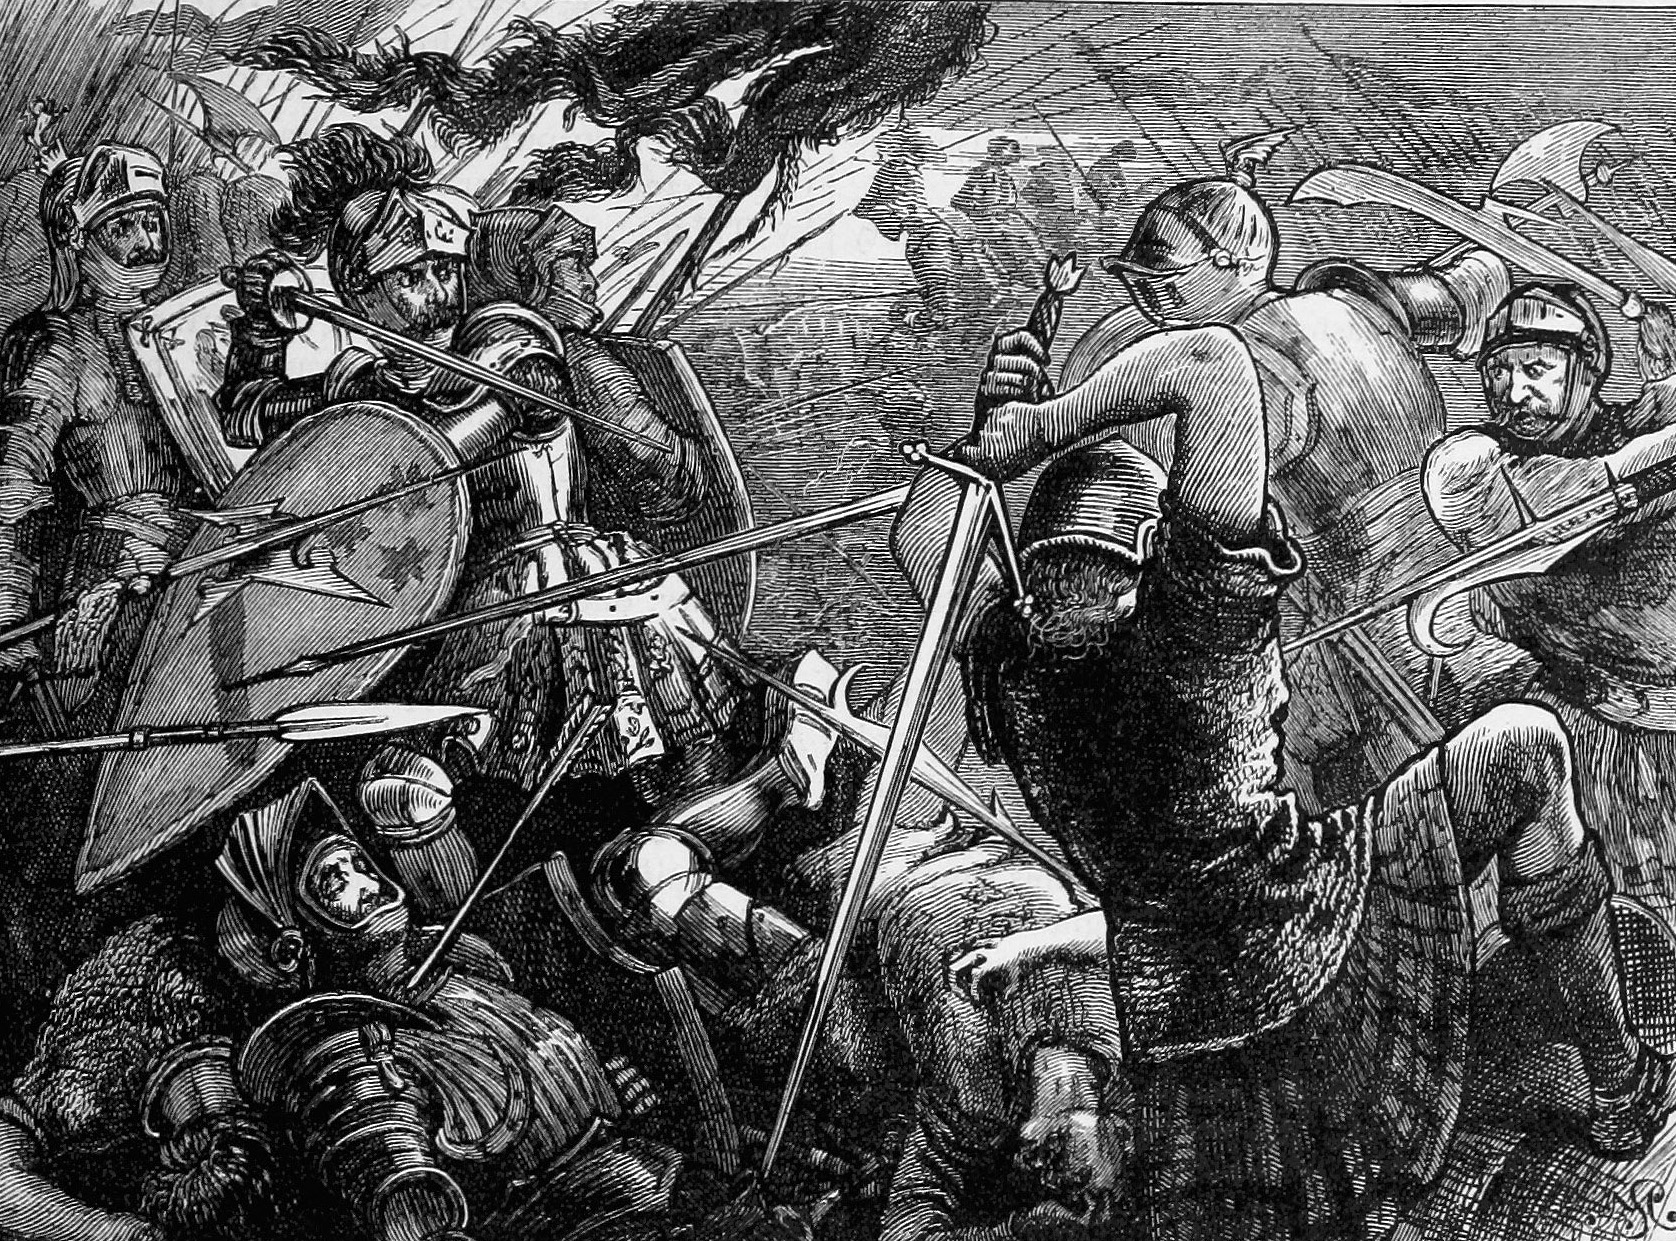  The Scottish earls of Lennox and Argyle, whose highlander reserves failed to shore up King James’ division, fell prey to Lord Stanley’s fast-moving brigade of archers. Approaching the highlanders over dead ground, they caught the division by surprise and routed it. 